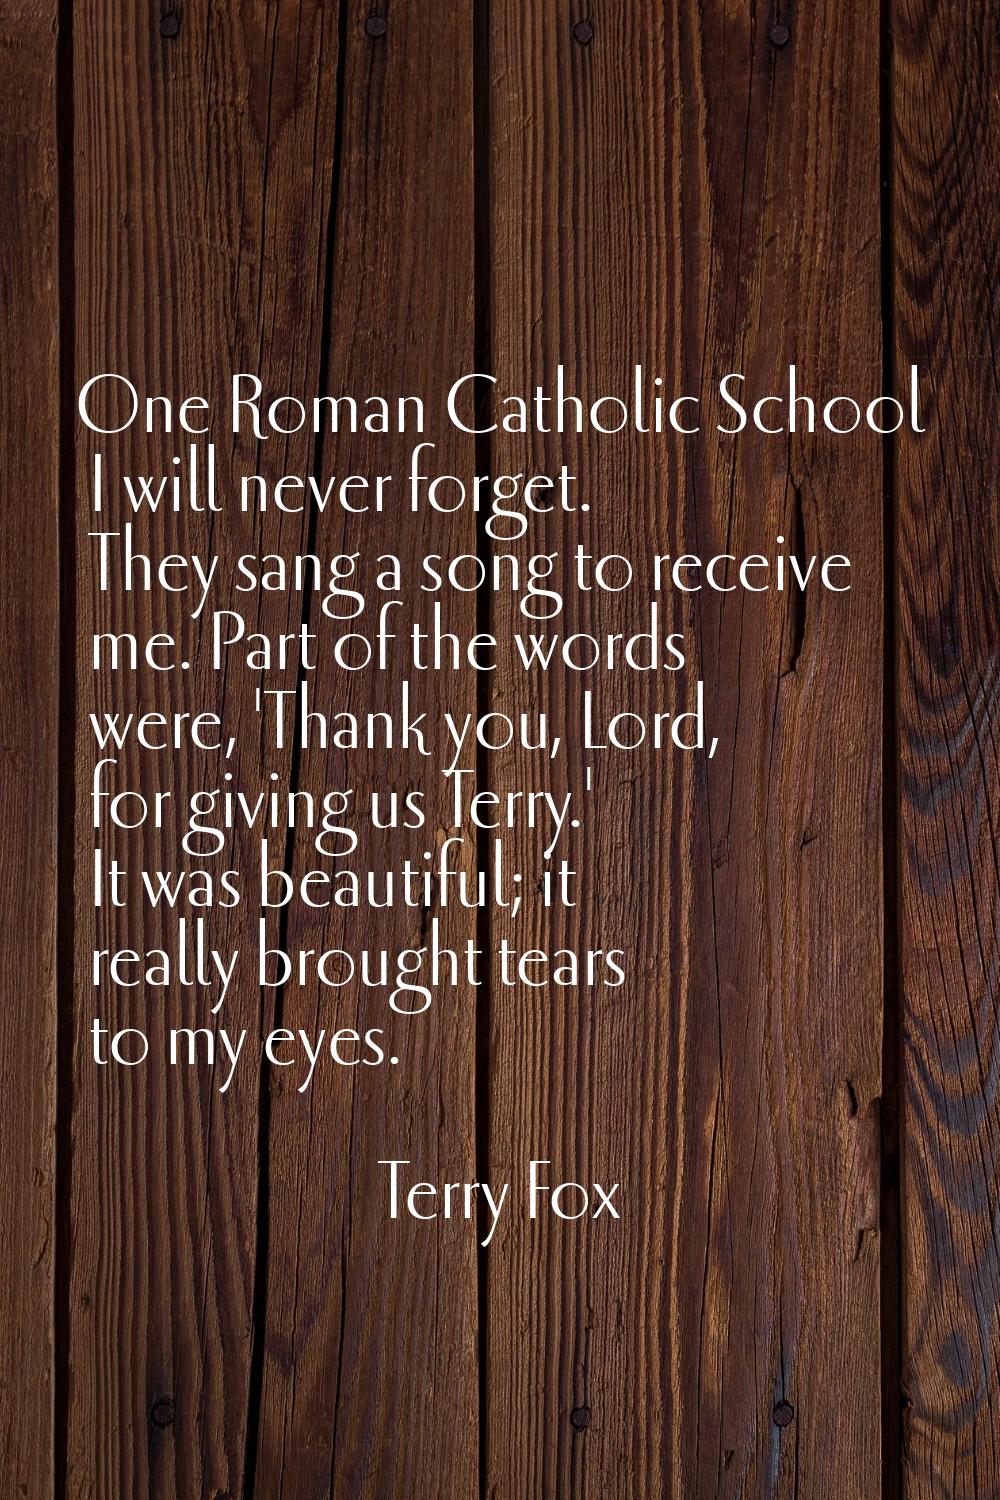 One Roman Catholic School I will never forget. They sang a song to receive me. Part of the words we